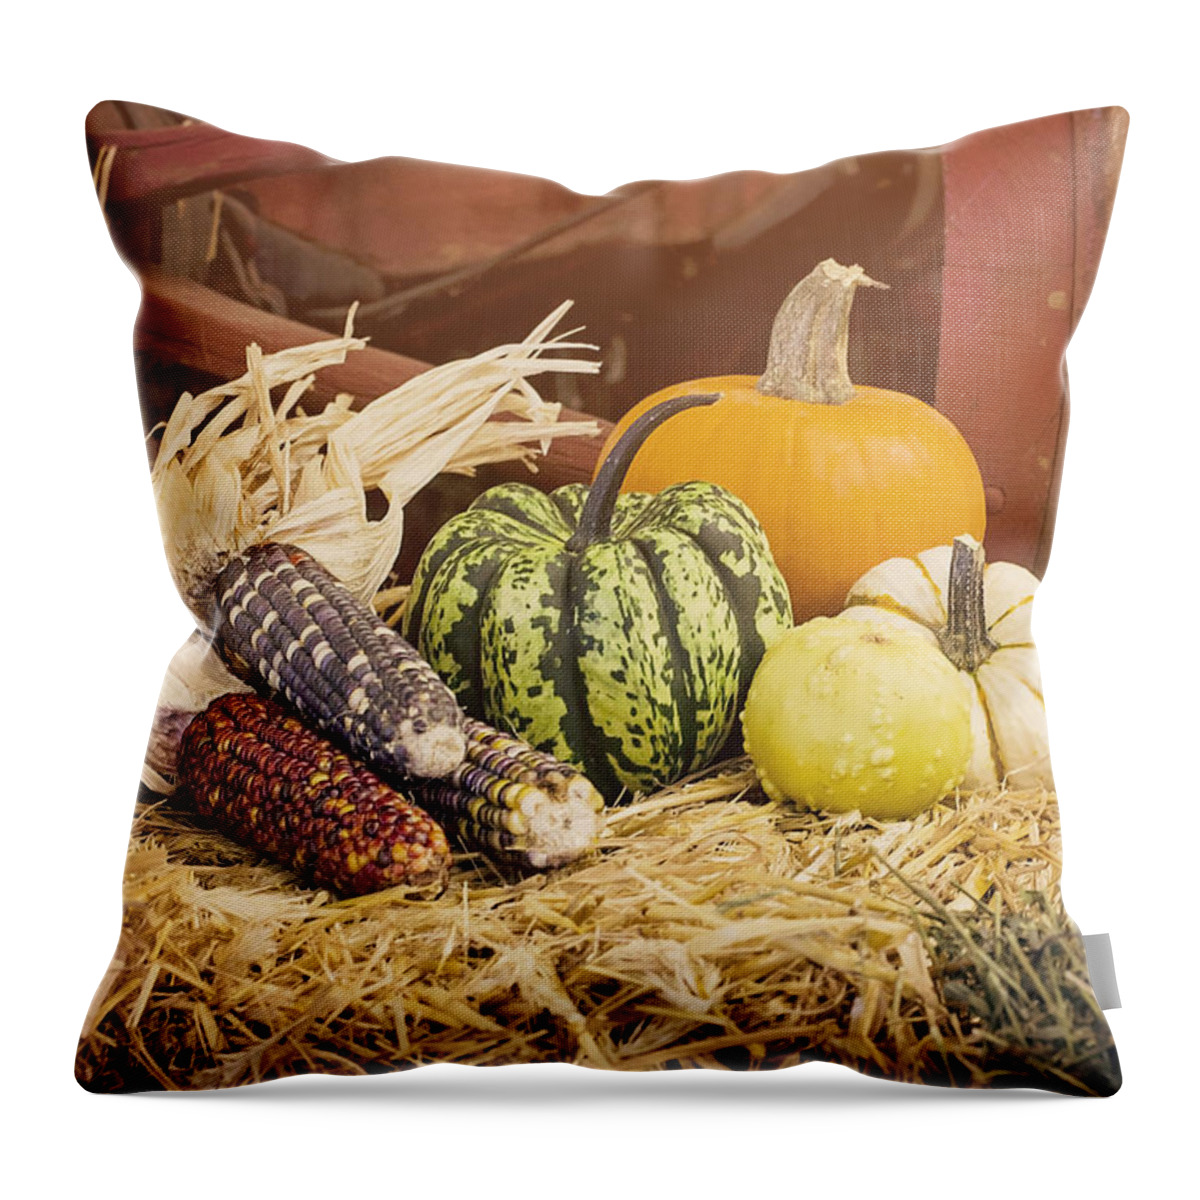 Pumpkin Throw Pillow featuring the photograph Arrival of Autumn by Heather Applegate